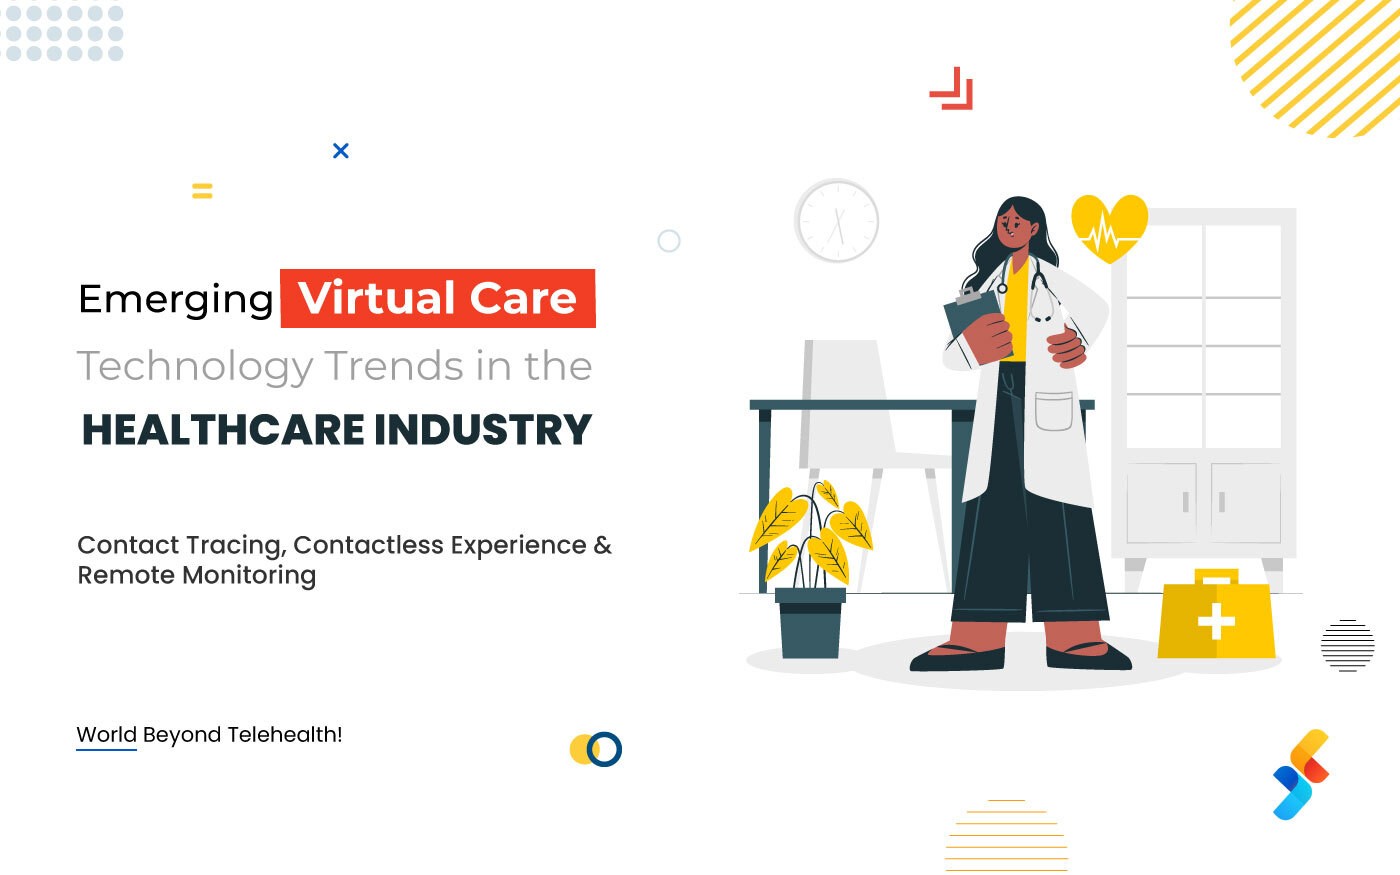 Emerging Virtual Care Technology Trends in the Healthcare Industry